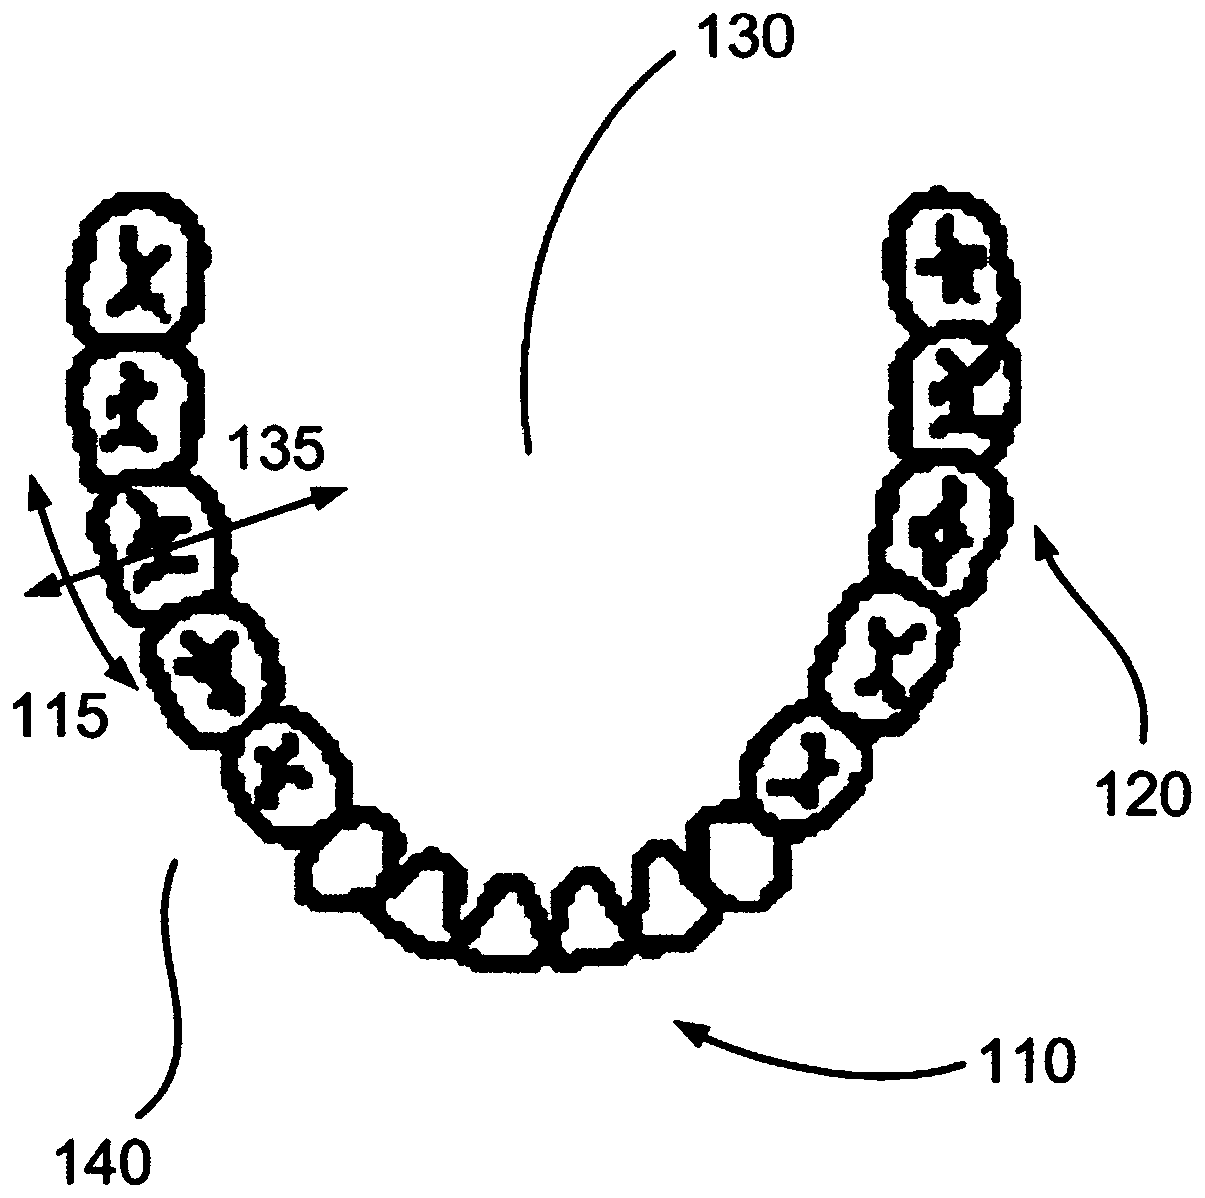 An orthodontic device